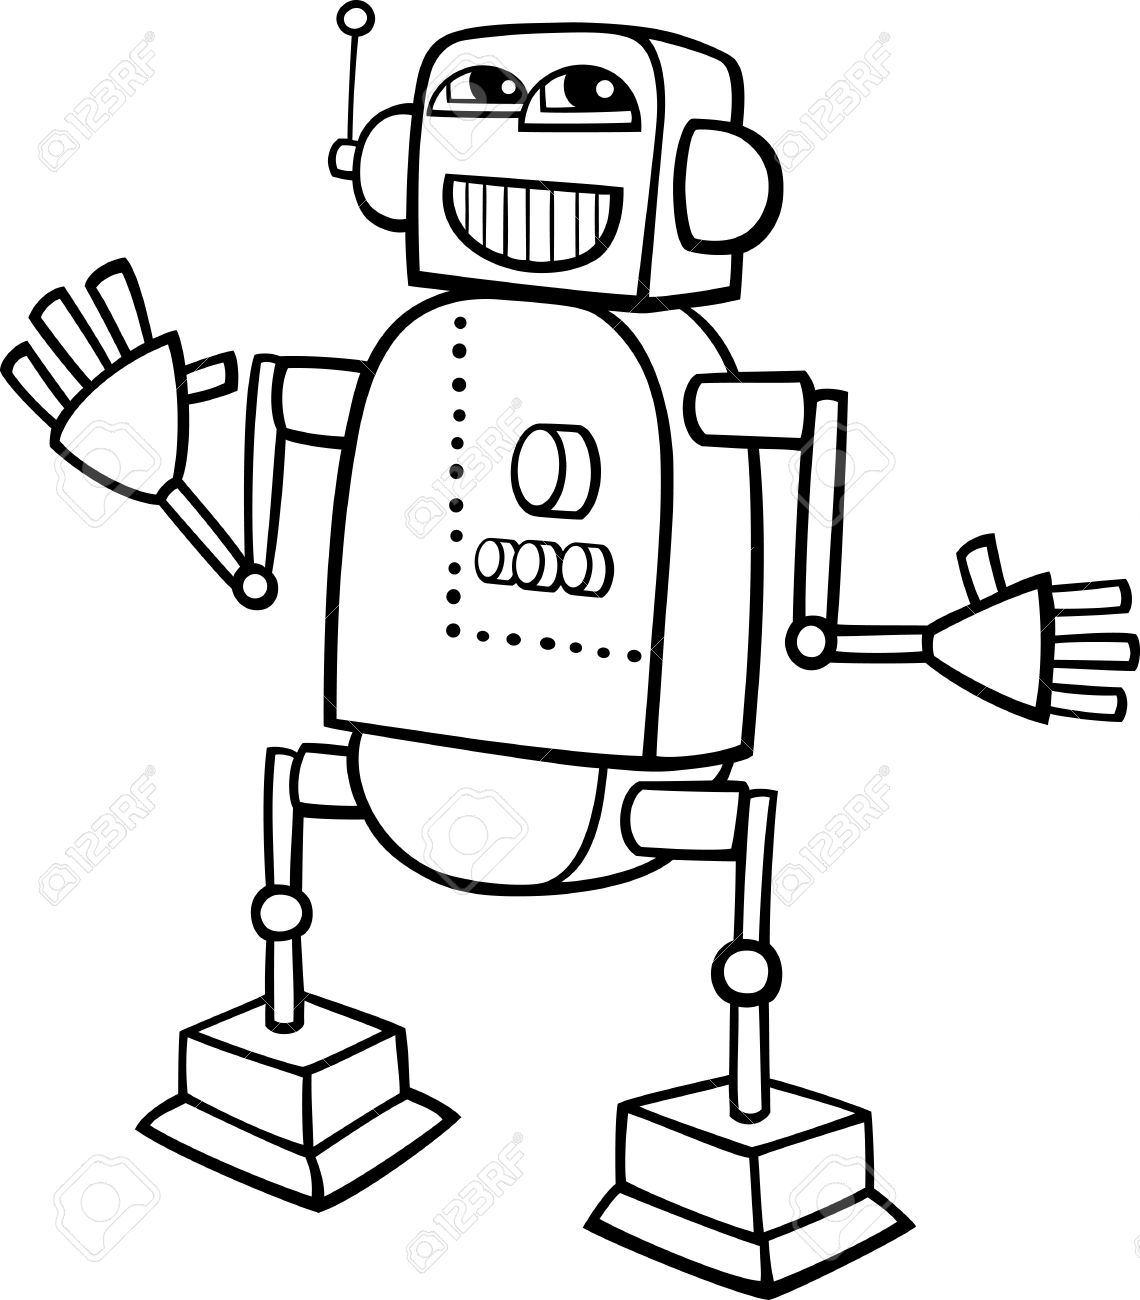 Robot clipart black and white